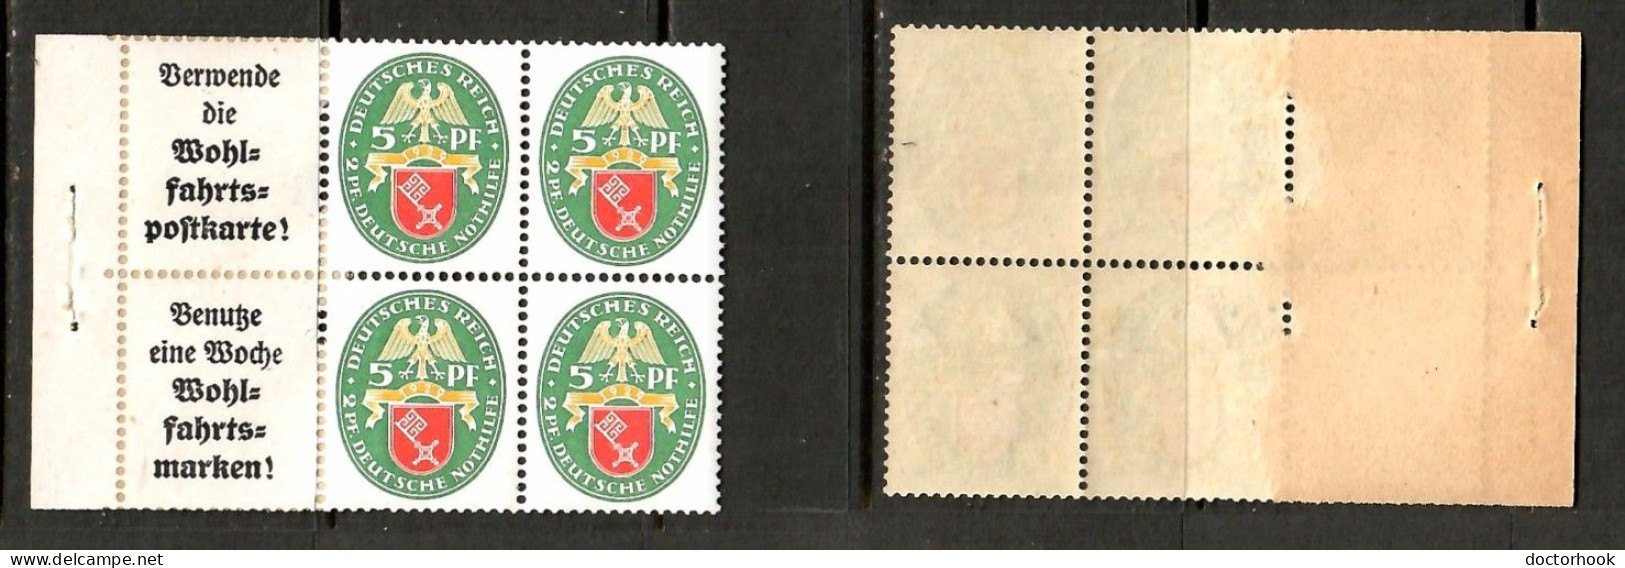 GERMANY   Scott # B 28* MINT OG BOOKLET PANE Of 4 + 2 LABELS (PAPER ADHESION)  (CONDITION AS PER SCAN) (LG-1764) - Libretti & Se-tenant